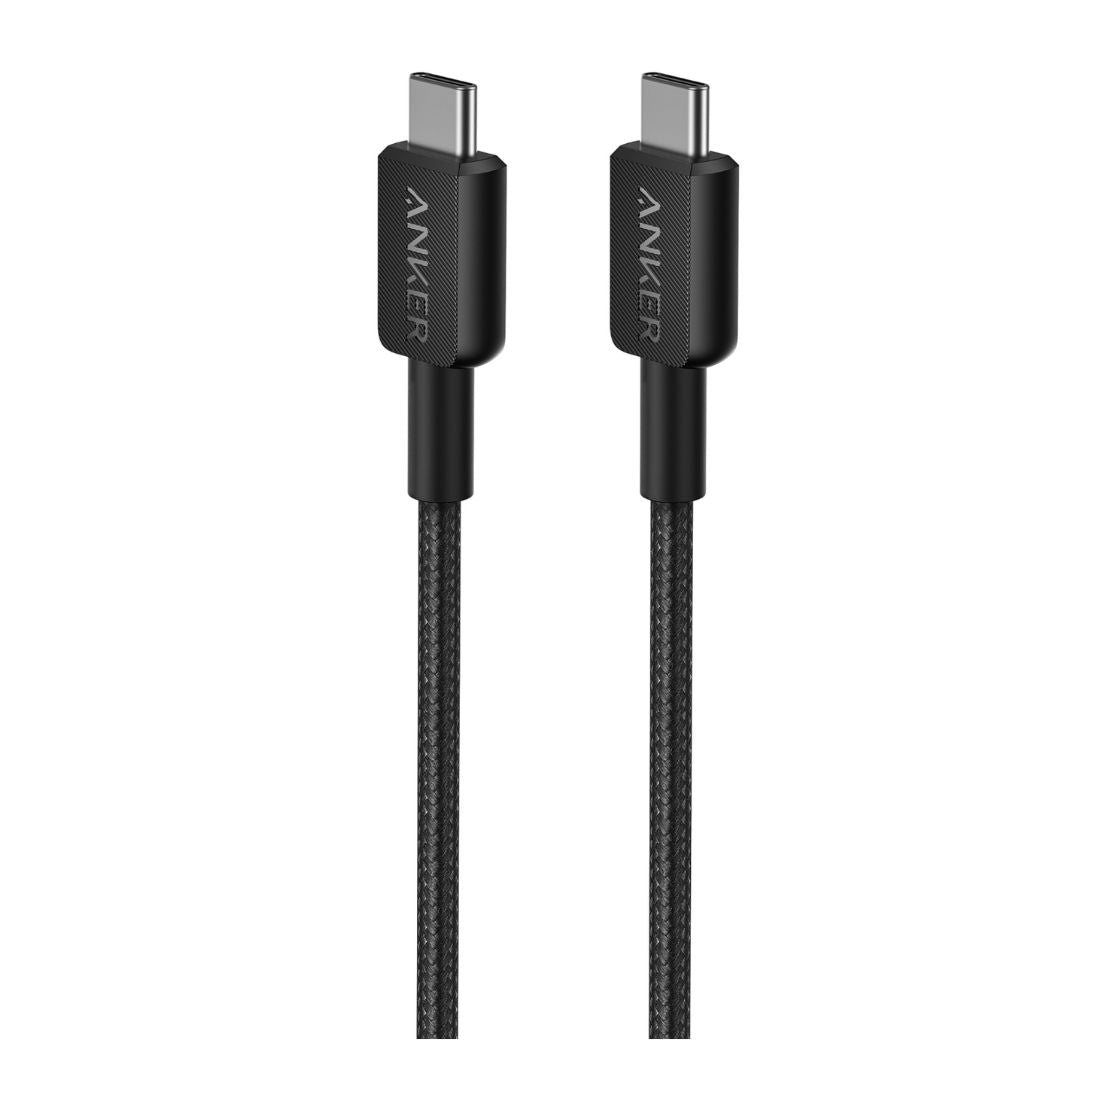 Anker 322 USB-C to USB-C Braided Cable (6ft/1.8m) - Black A81F6H11 Anker322 USB-C to USB-C Braided Cable (6ft/1.8m) - Black A81F6H11